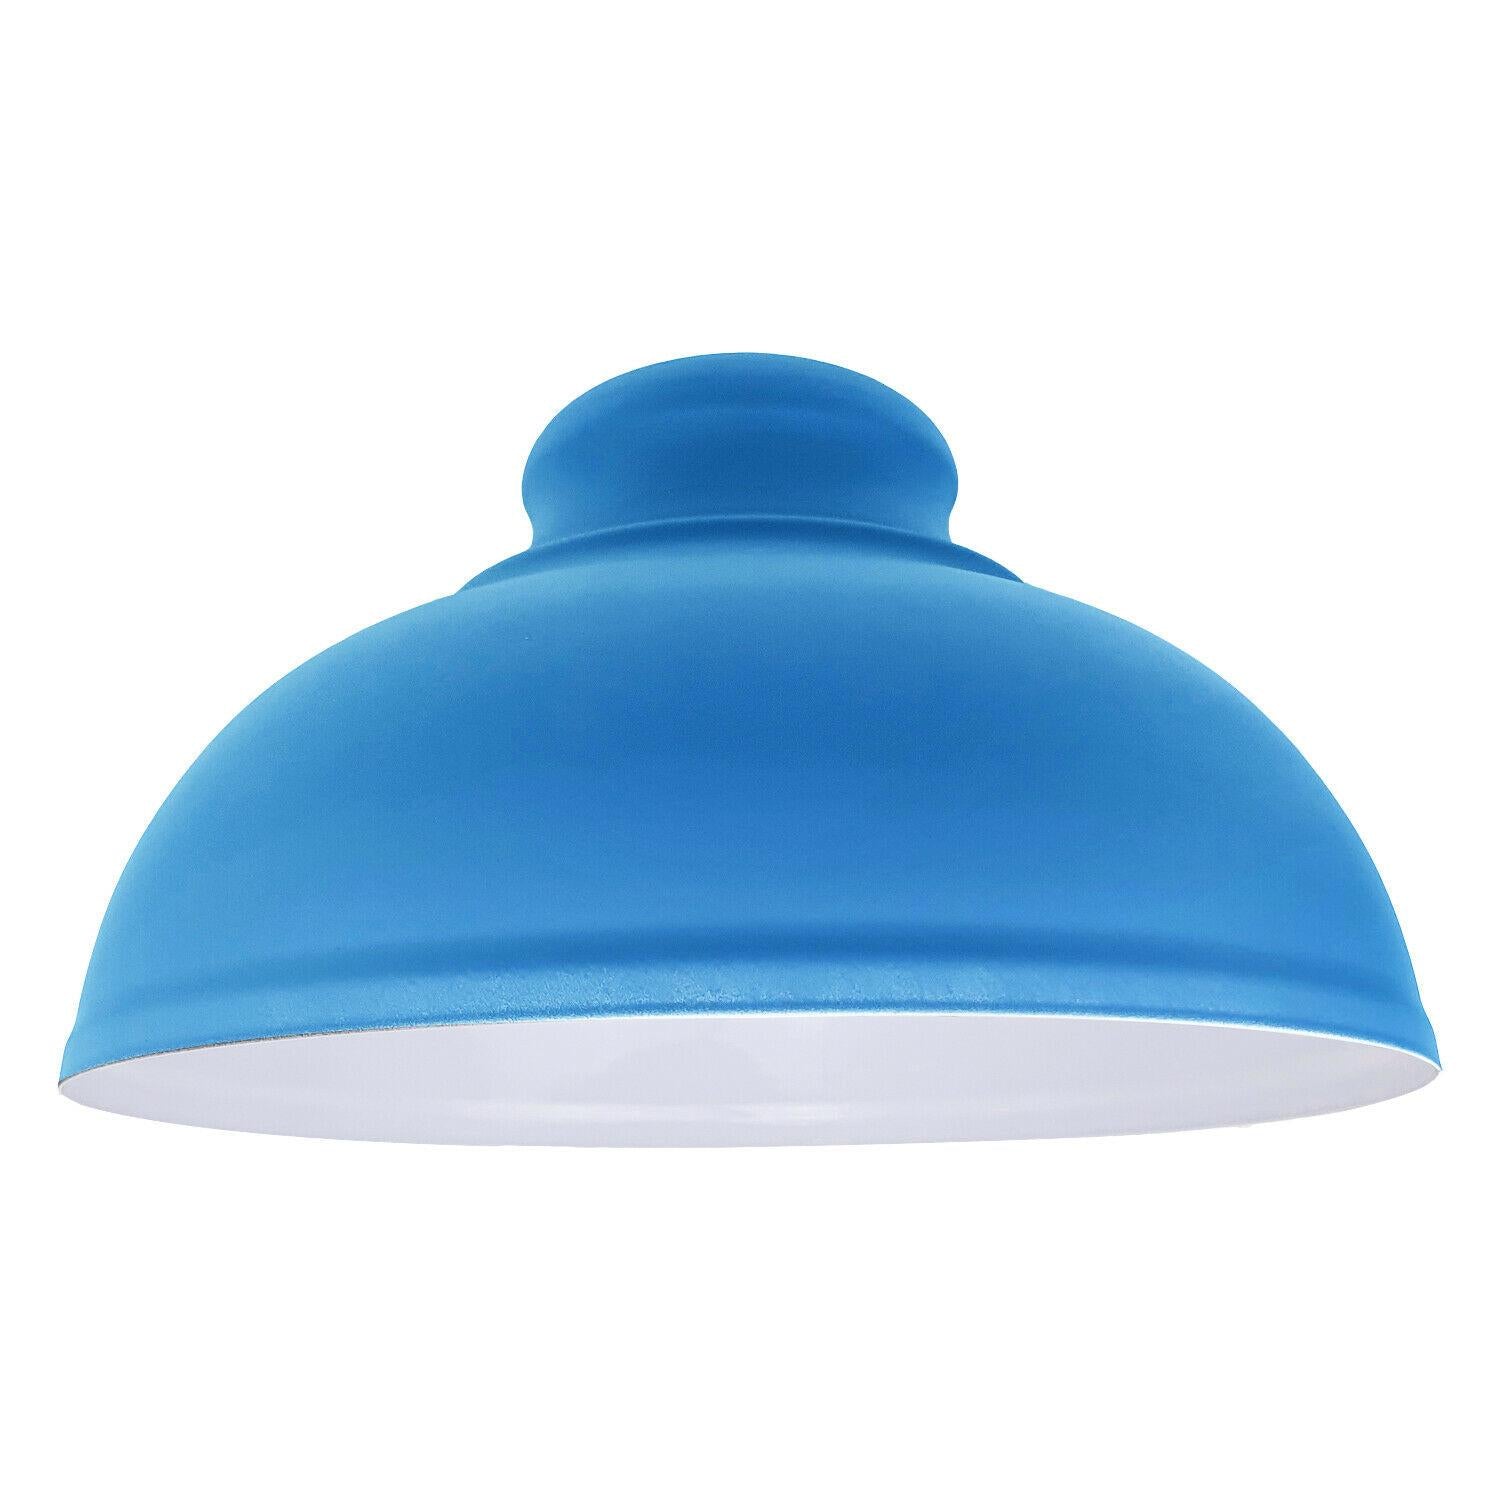 Blue easy fit light shade